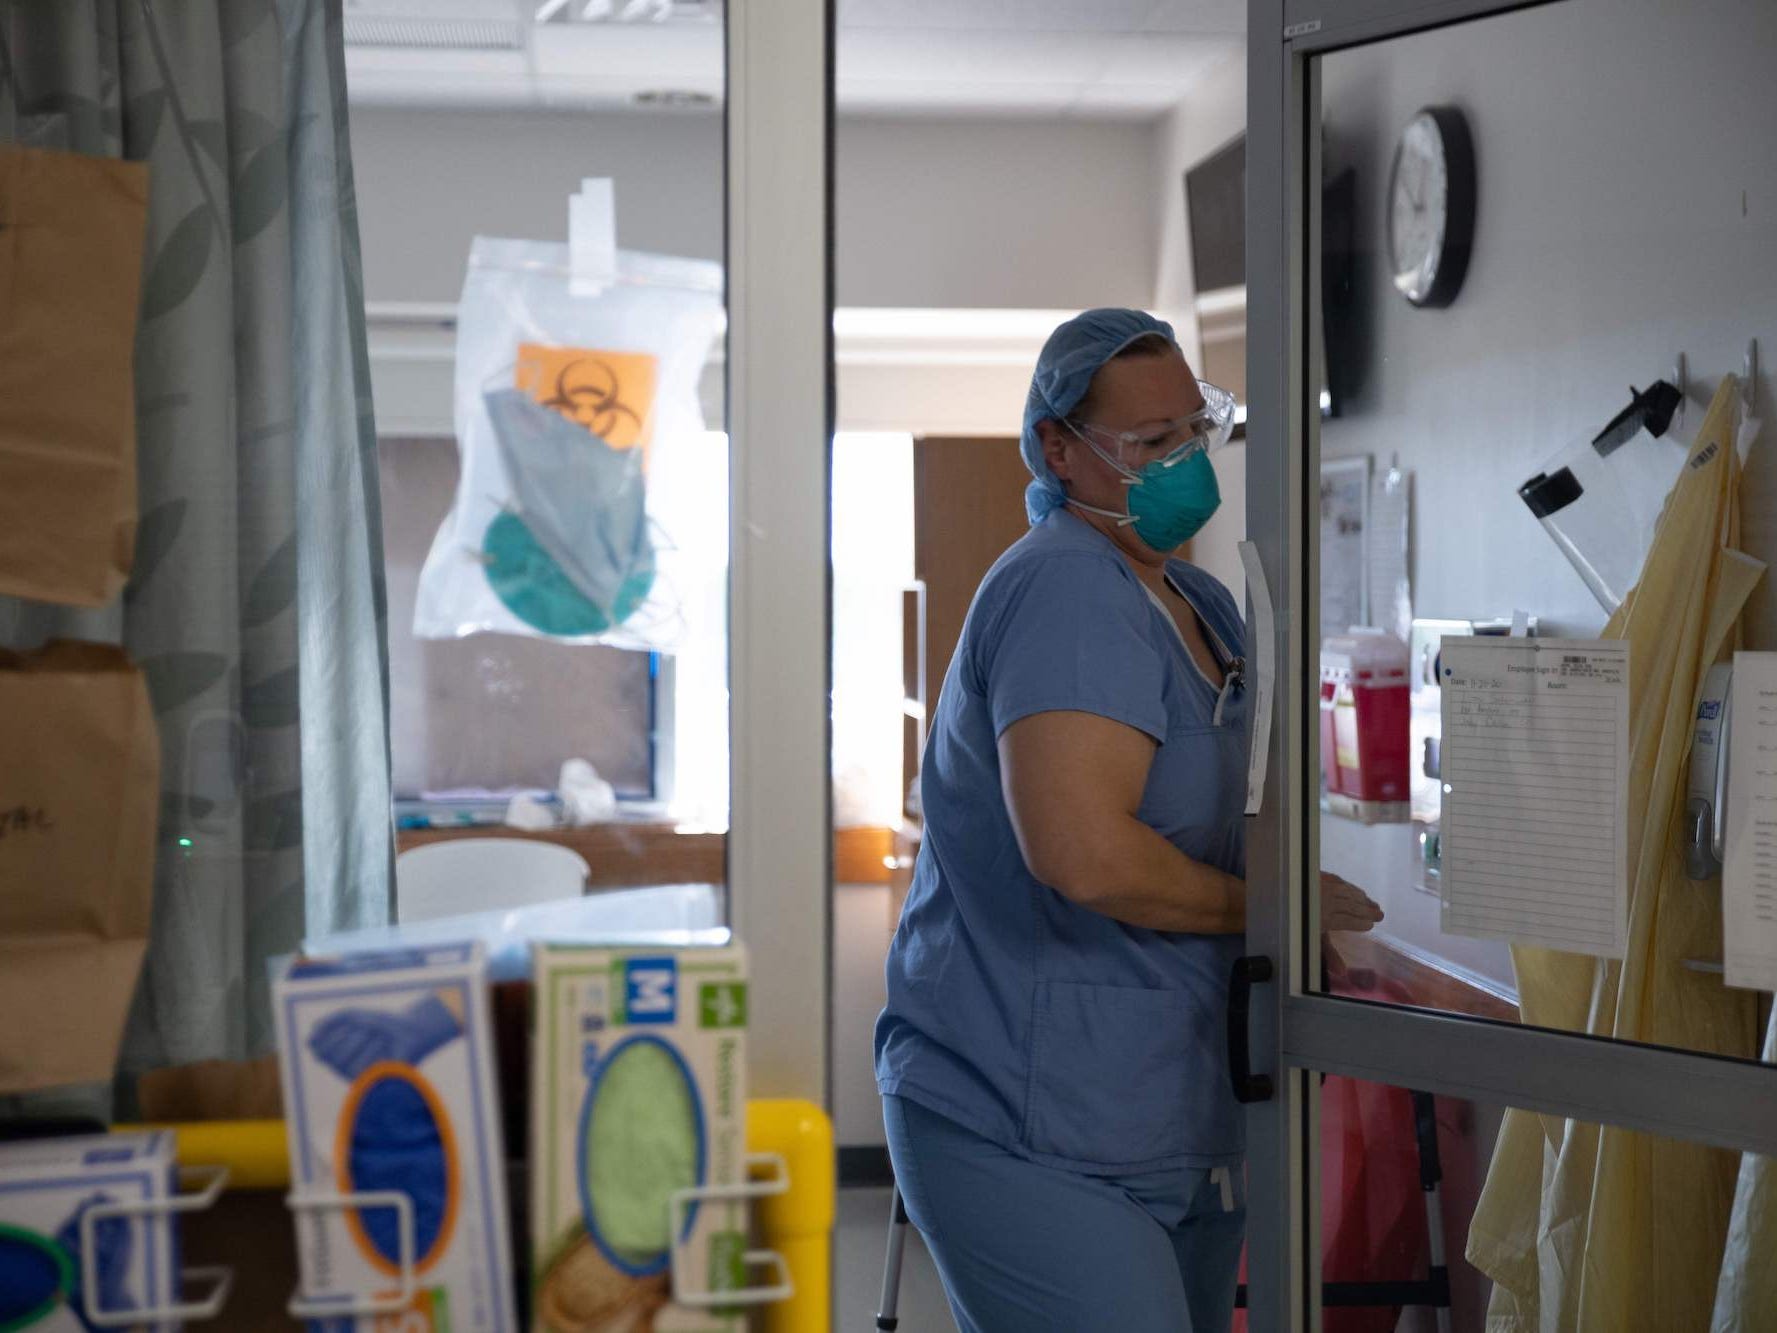 A healthcare professional exits a Covid-19 patient's room in the ICU at Van Wert County Hospital in Van Wert, Ohio on November 20, 2020.